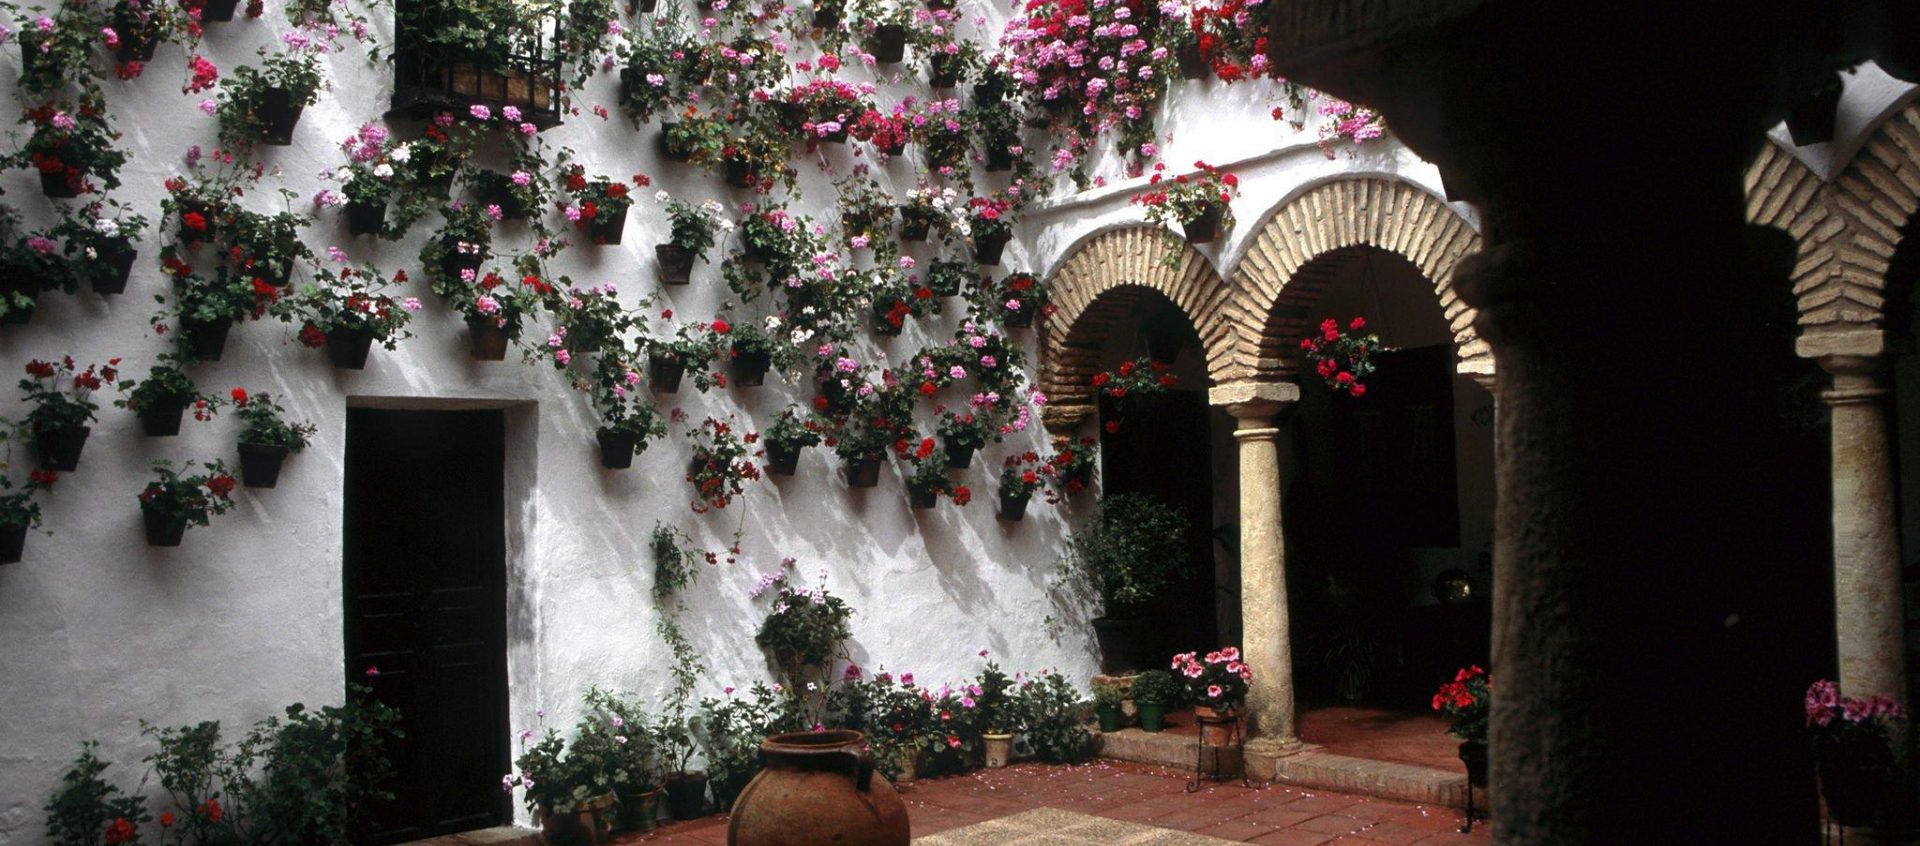 Interior of a typical Cordoba house with its flowers completely decorating the walls and arches that frame the space we visited during our visit of the courtyards.